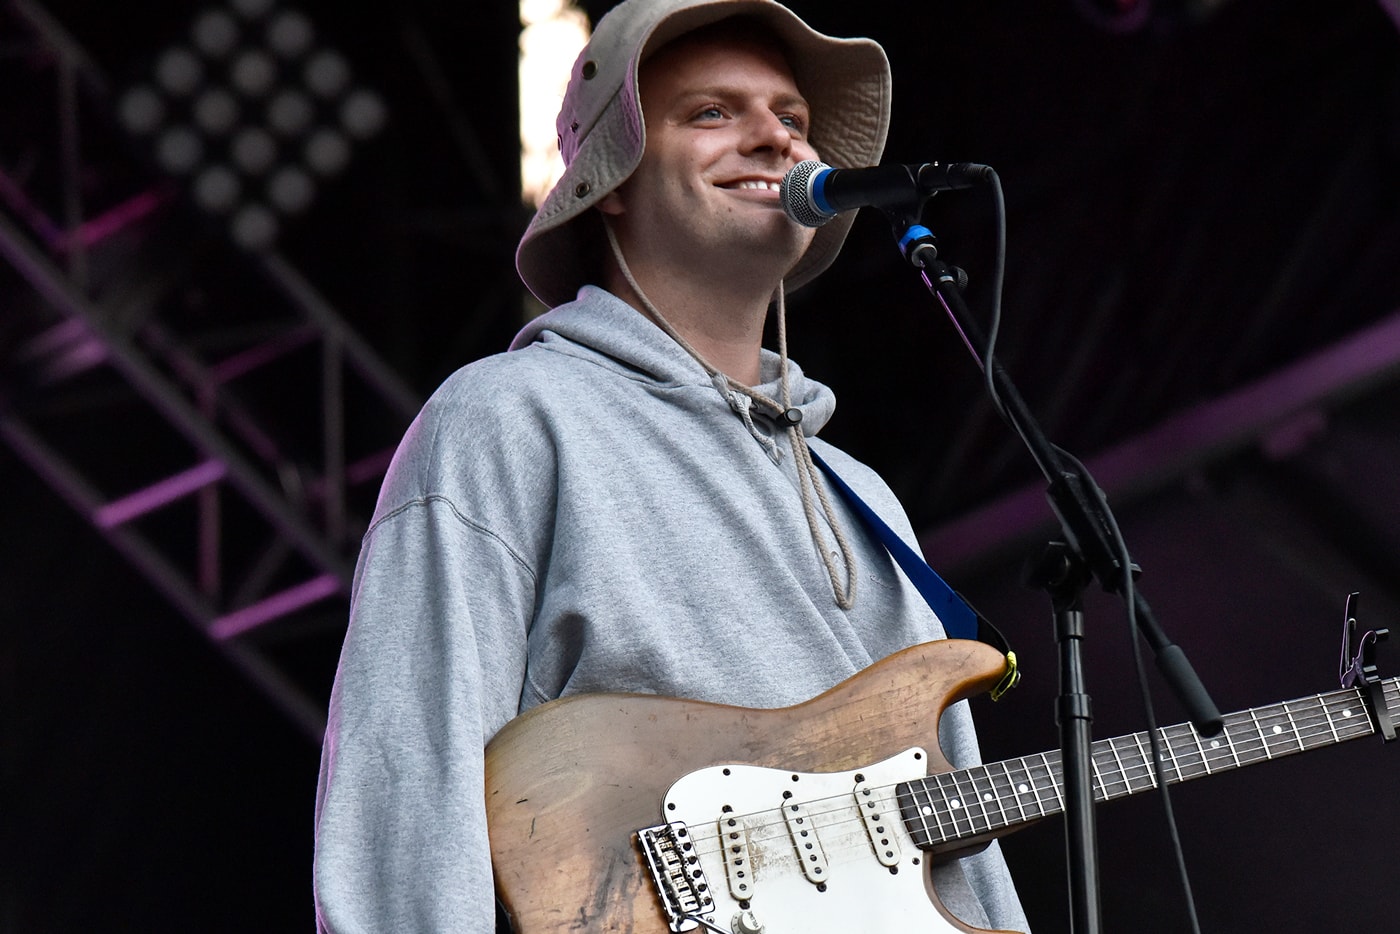 Mac DeMarco Covers Billy Joel's "Just The Way You Are" Live